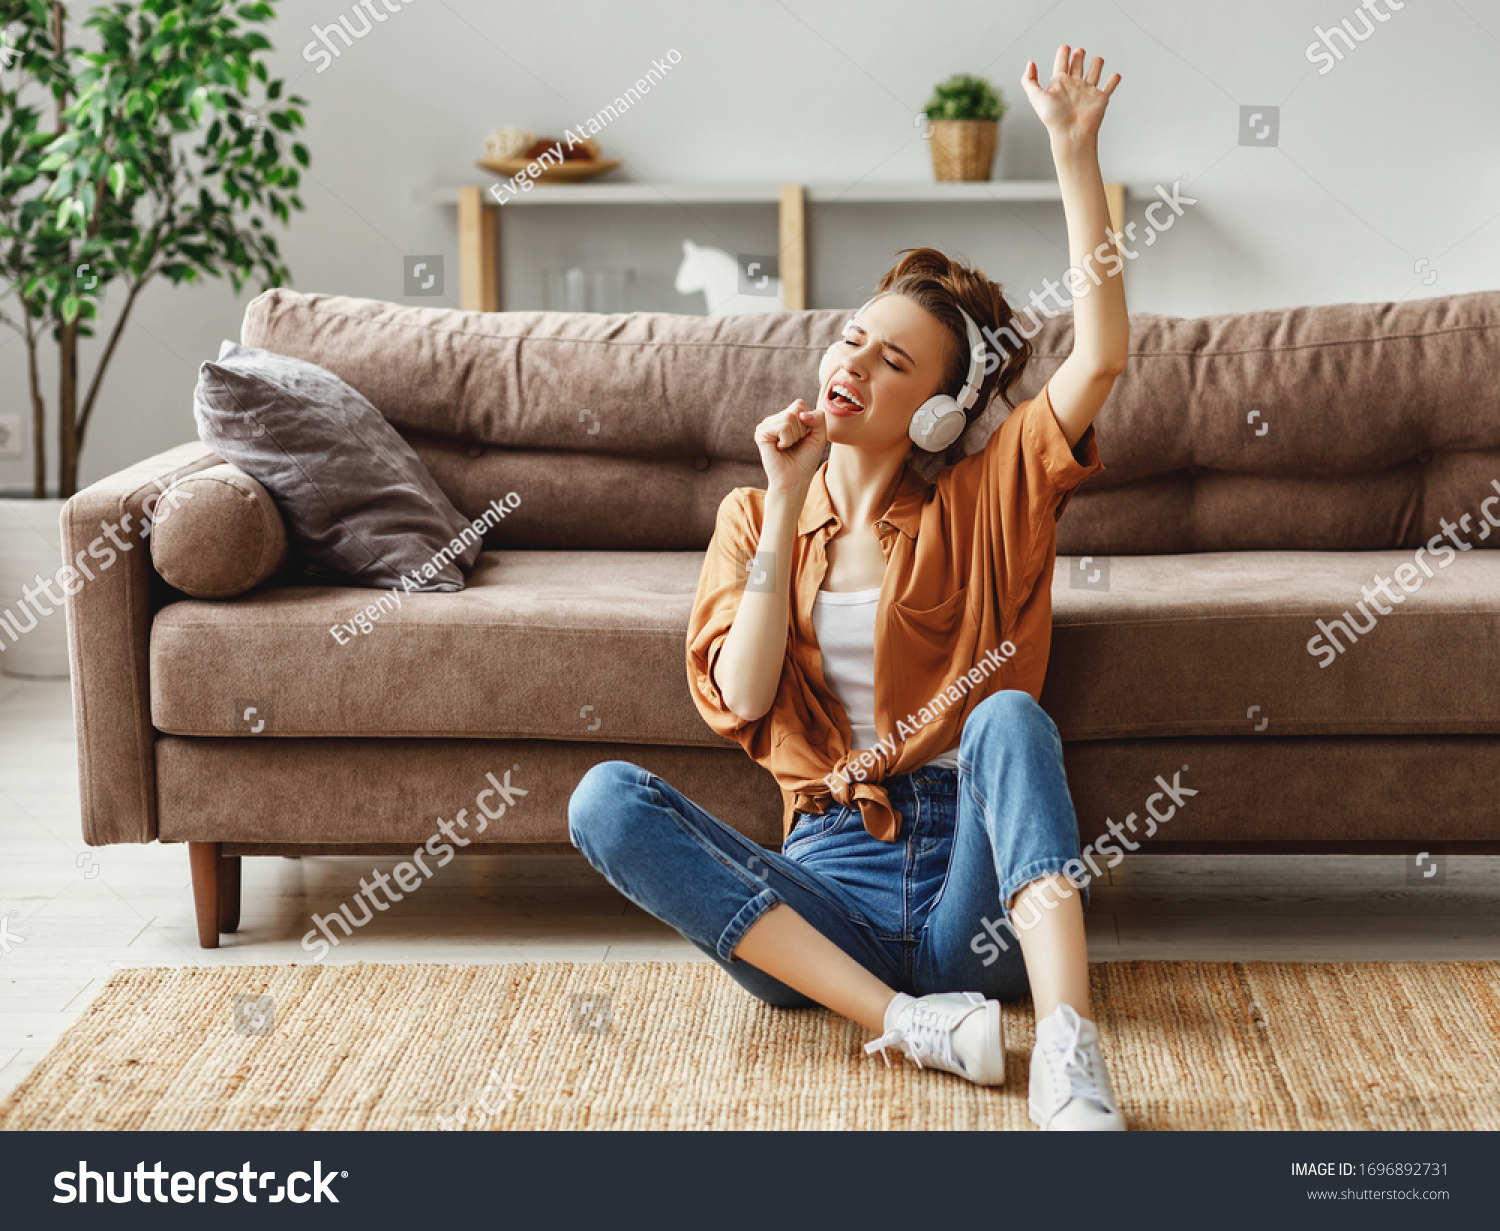 Young female in casual outfit listening to music in headphones and singing while sitting on floor near sofa and having fun at home
 #1696892731